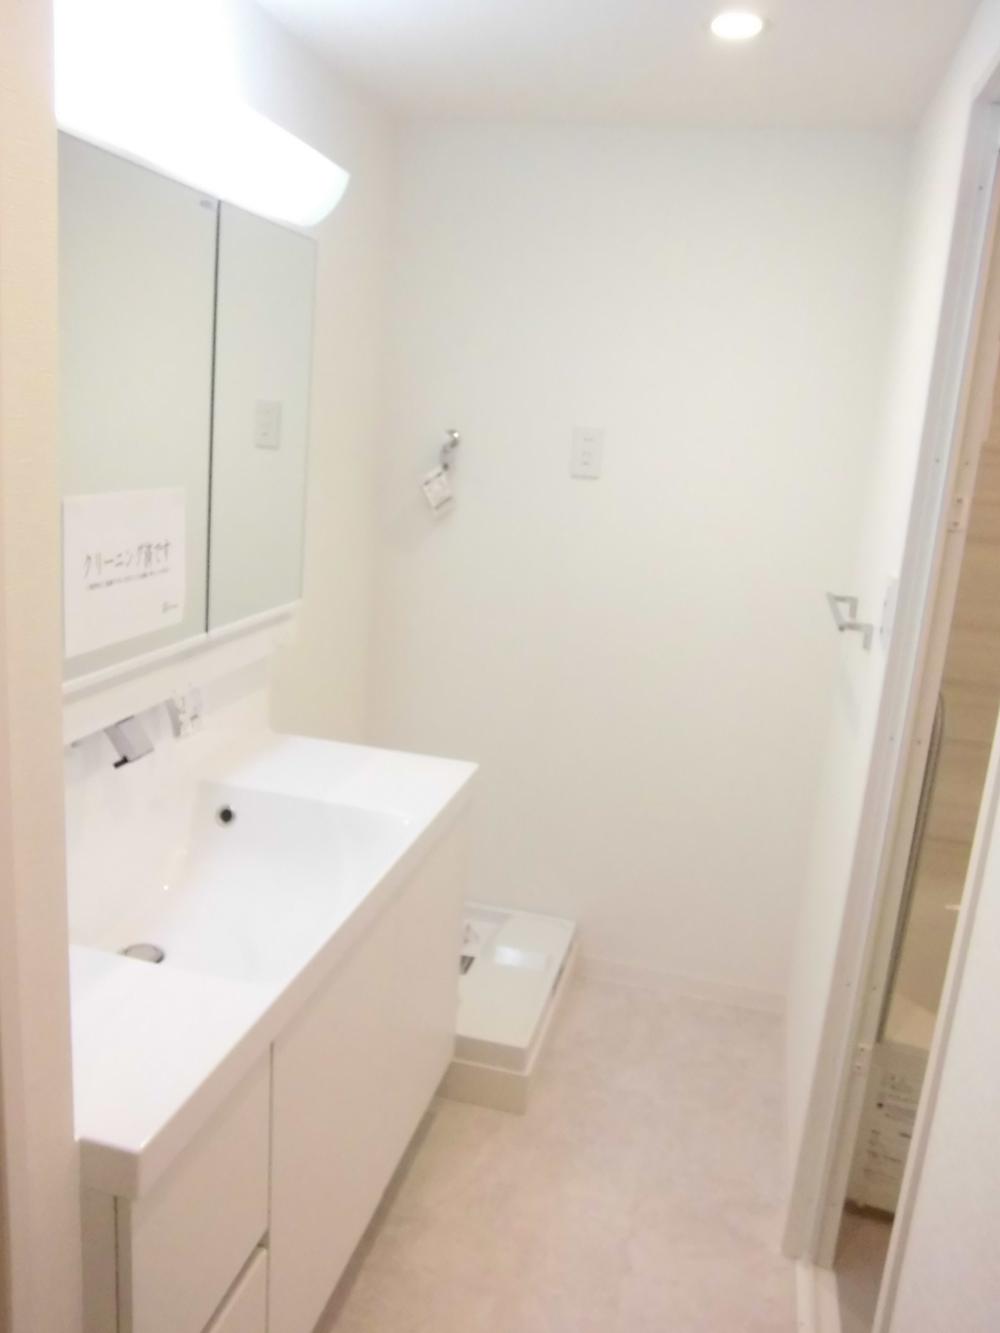 Wash basin, toilet. Washroom with a vanity with shower is comfortable there is also a storage